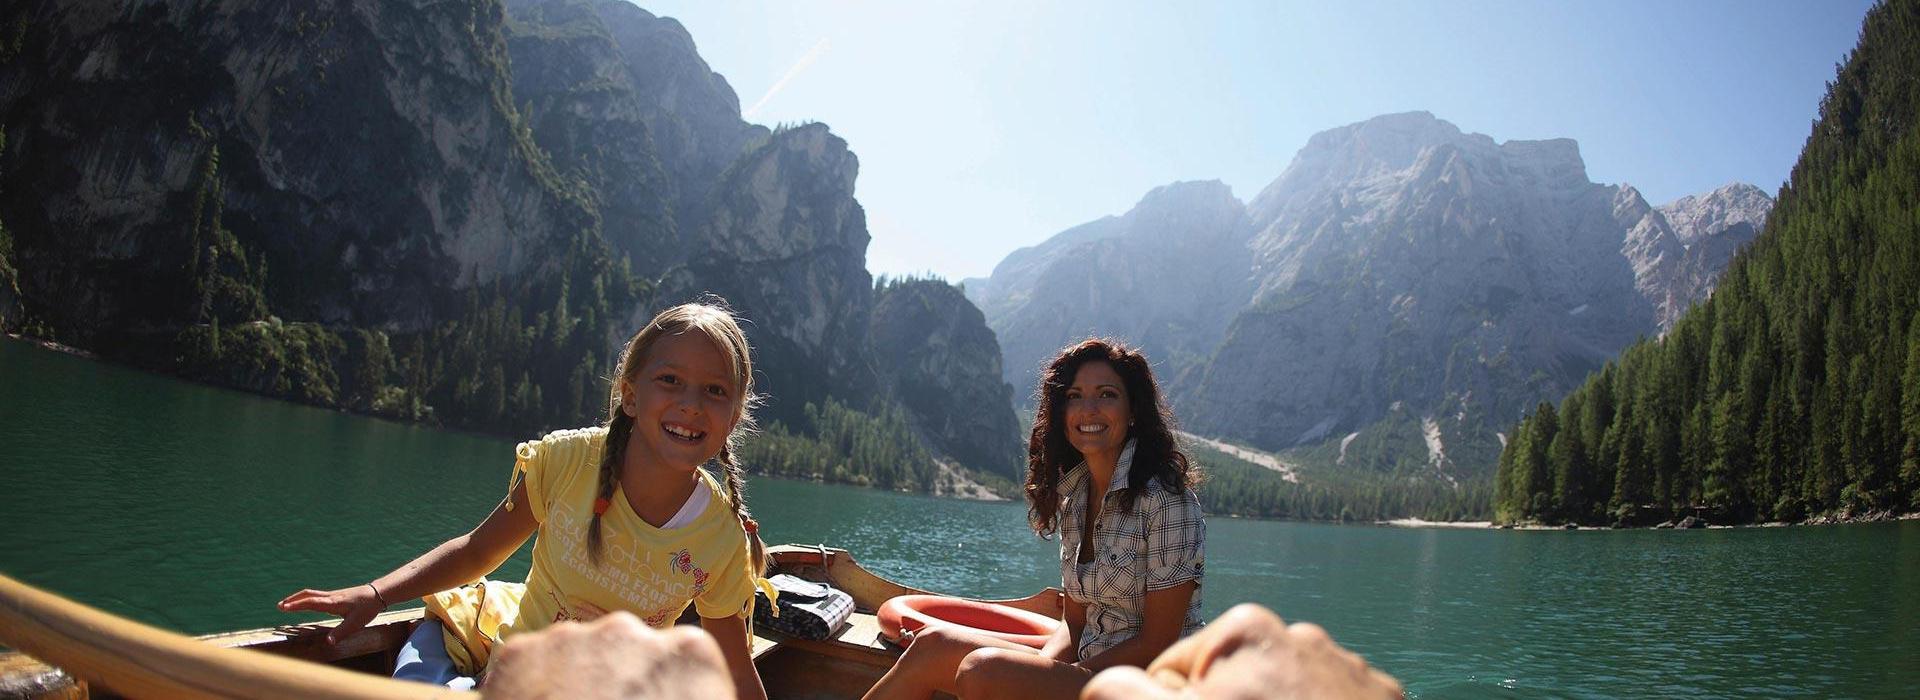 With the Rowing Boat on the Lake Braies